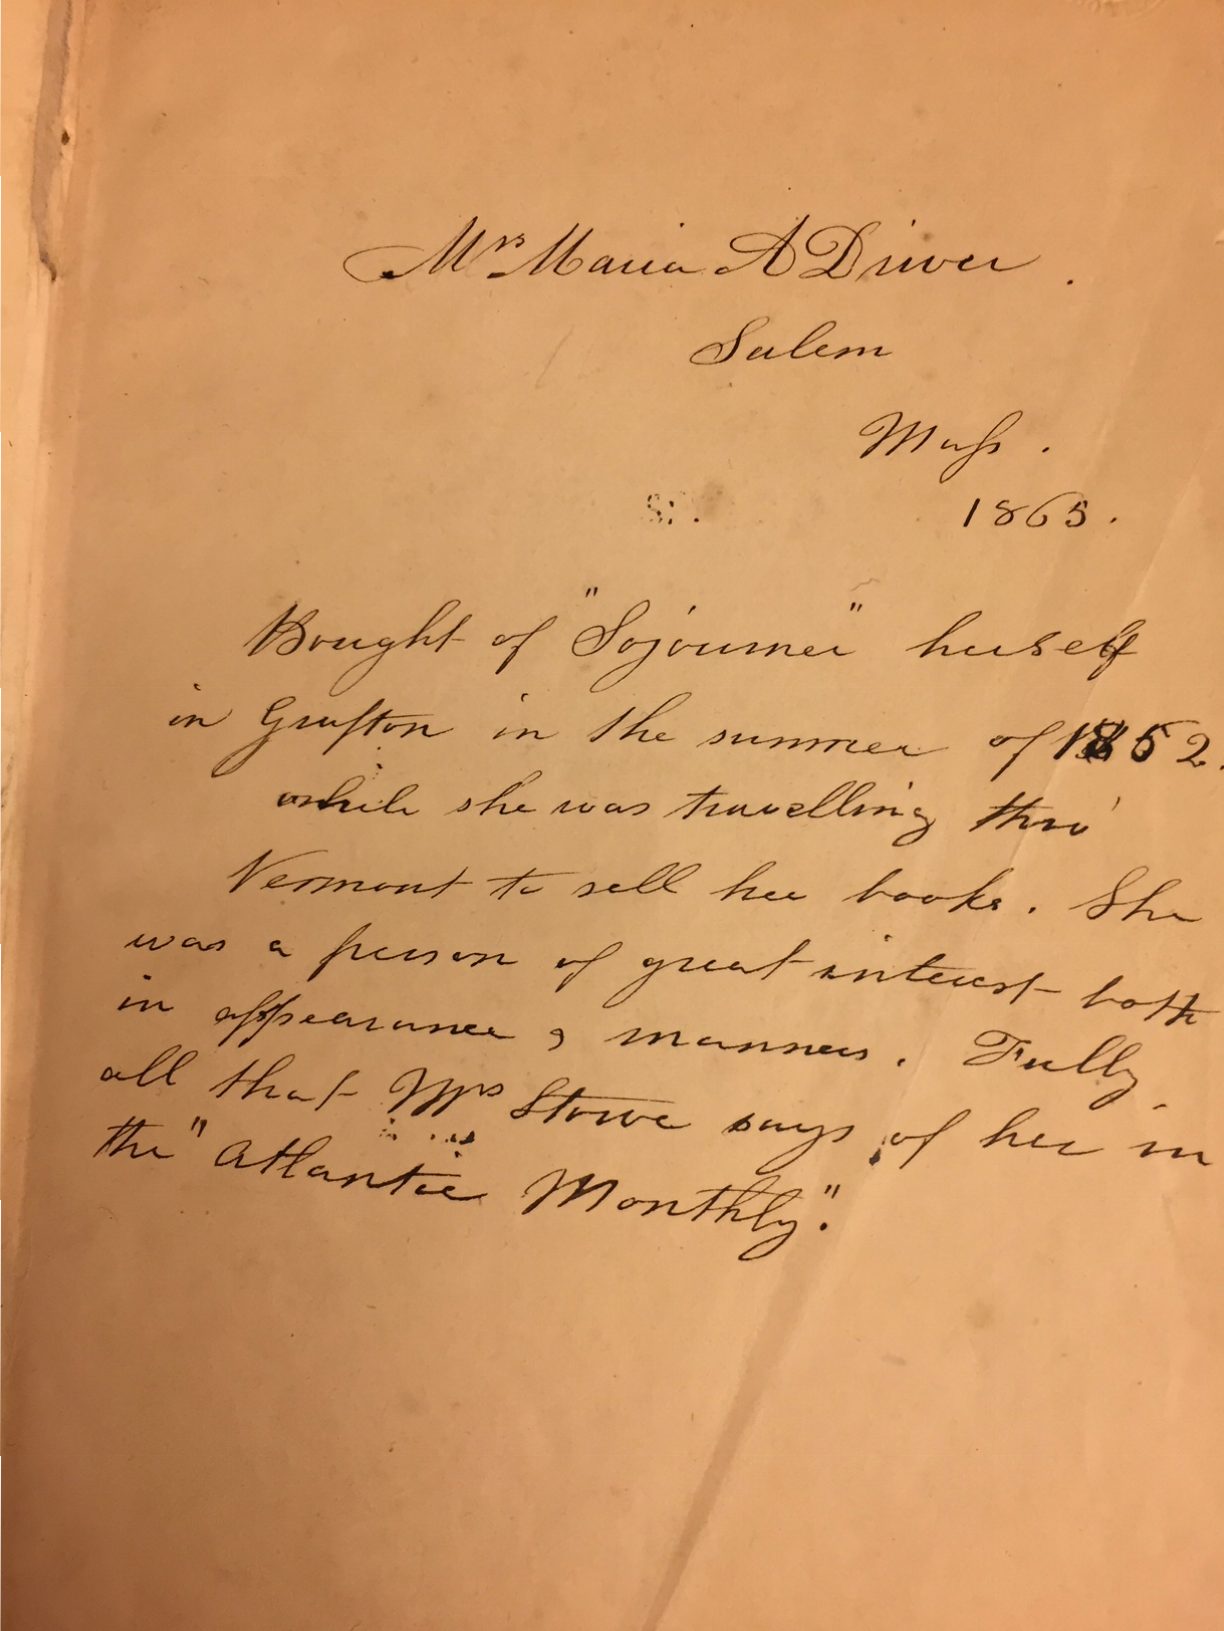 First edition of Sojourner Truth's 'Narrative'